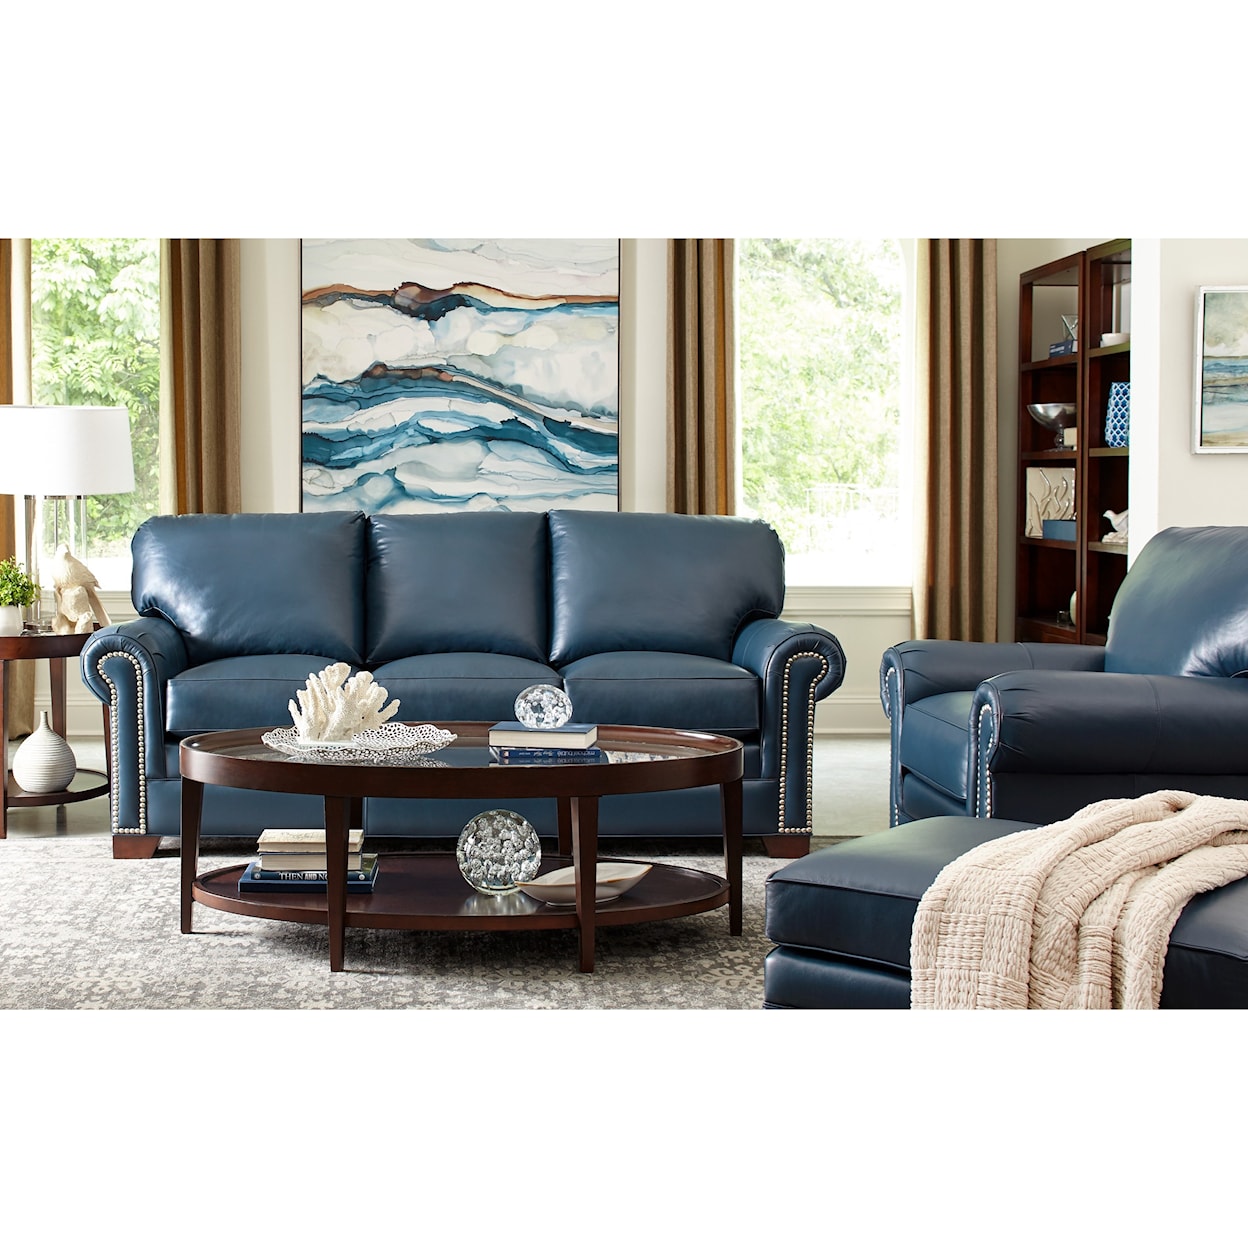 Craftmaster L756650 Living Room Group